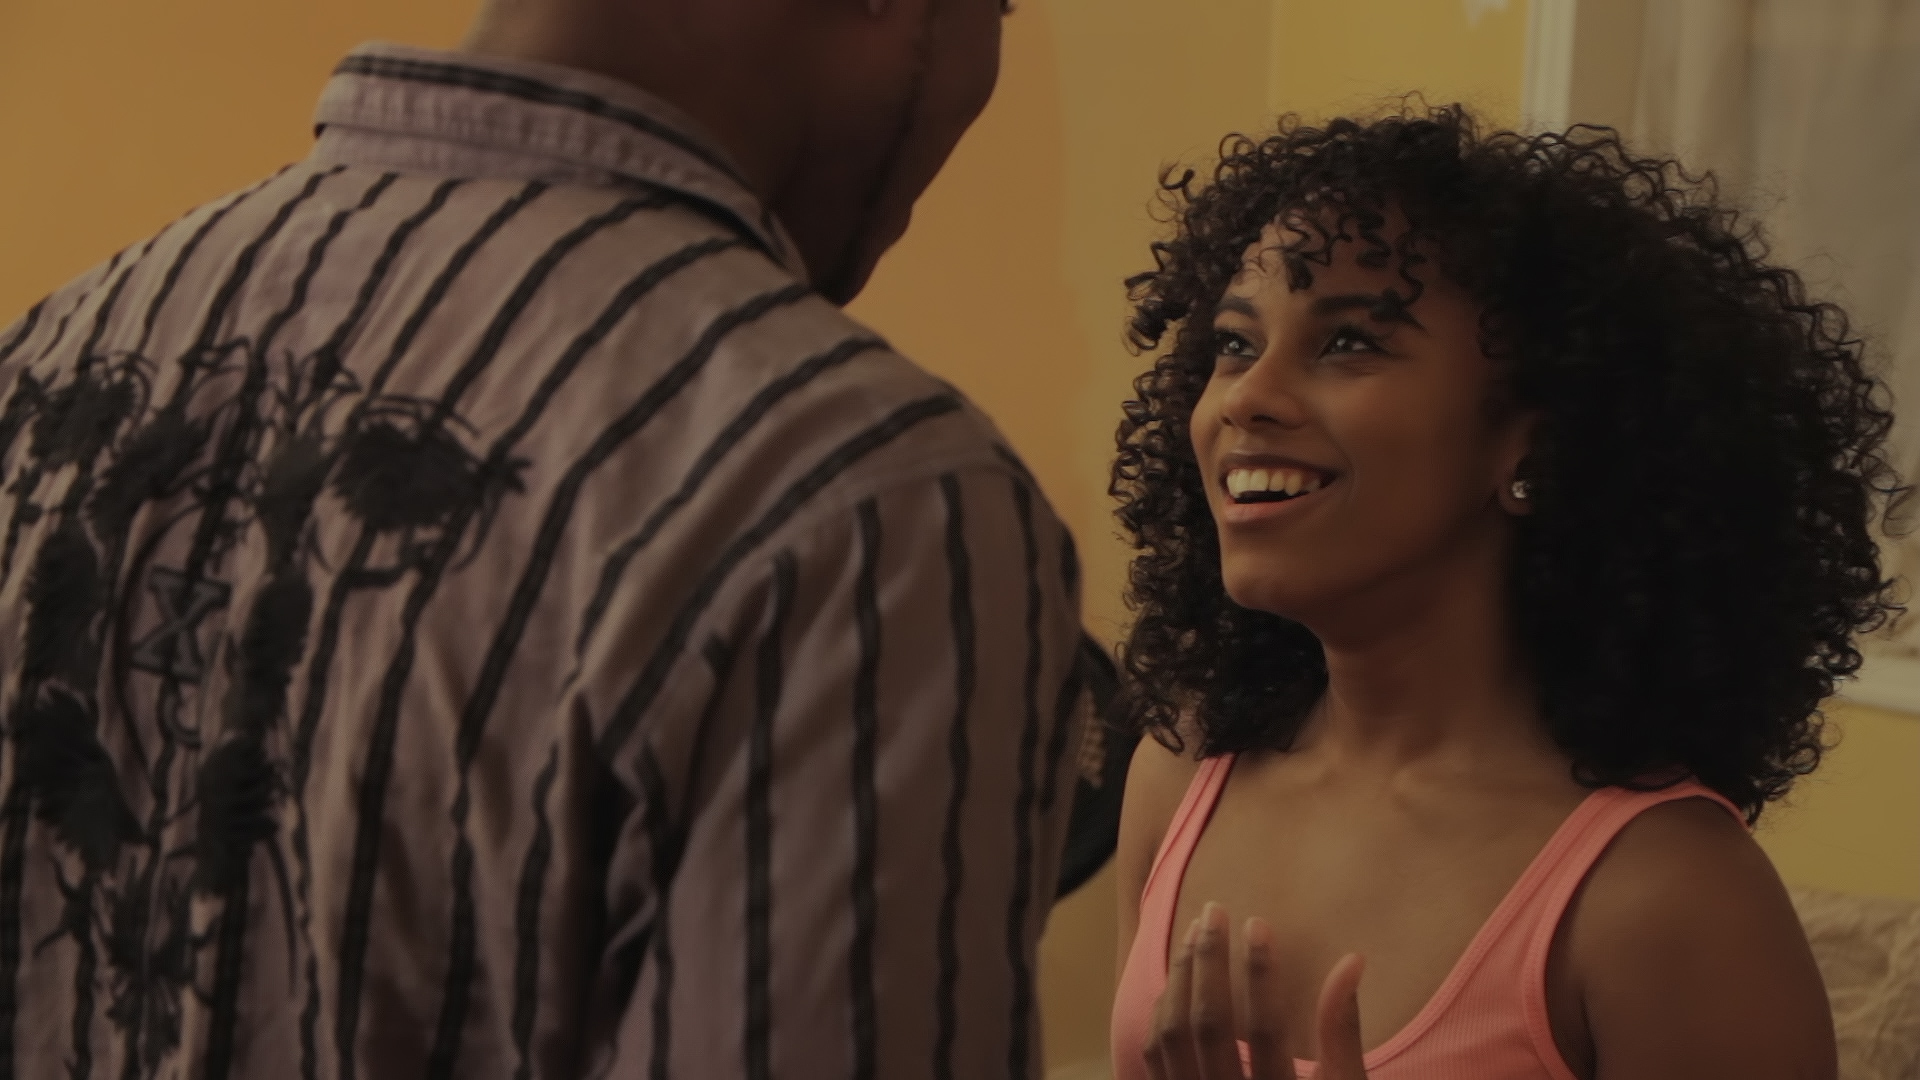 Still from Three of One Kind. Perri Pierre and Terri-Ann Peters